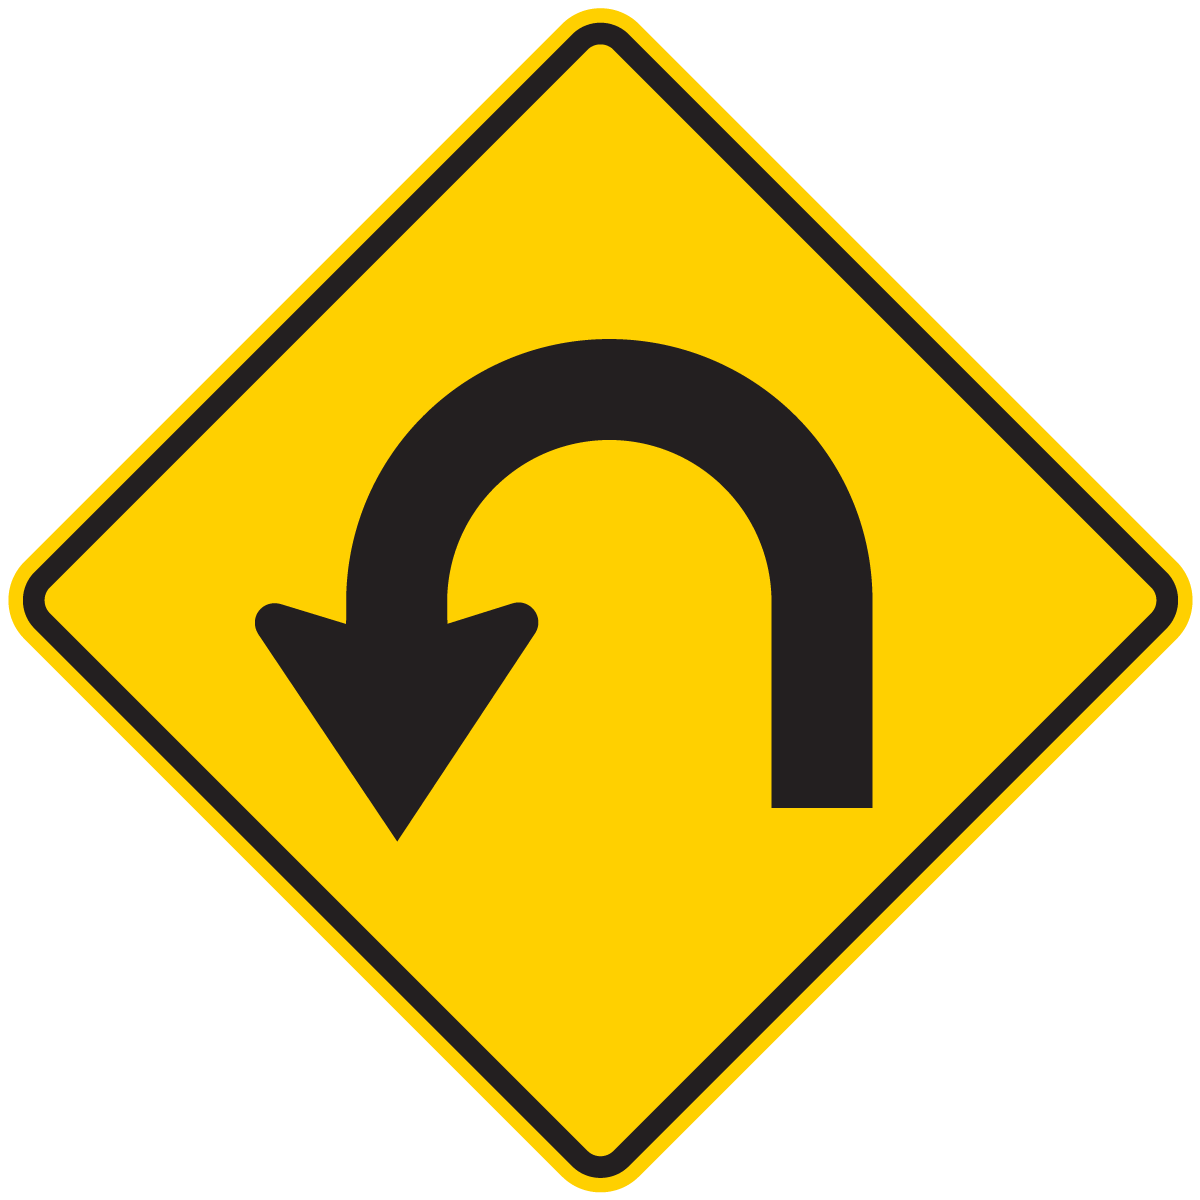 W1-11 	180 Degree Curve (Left or Right)